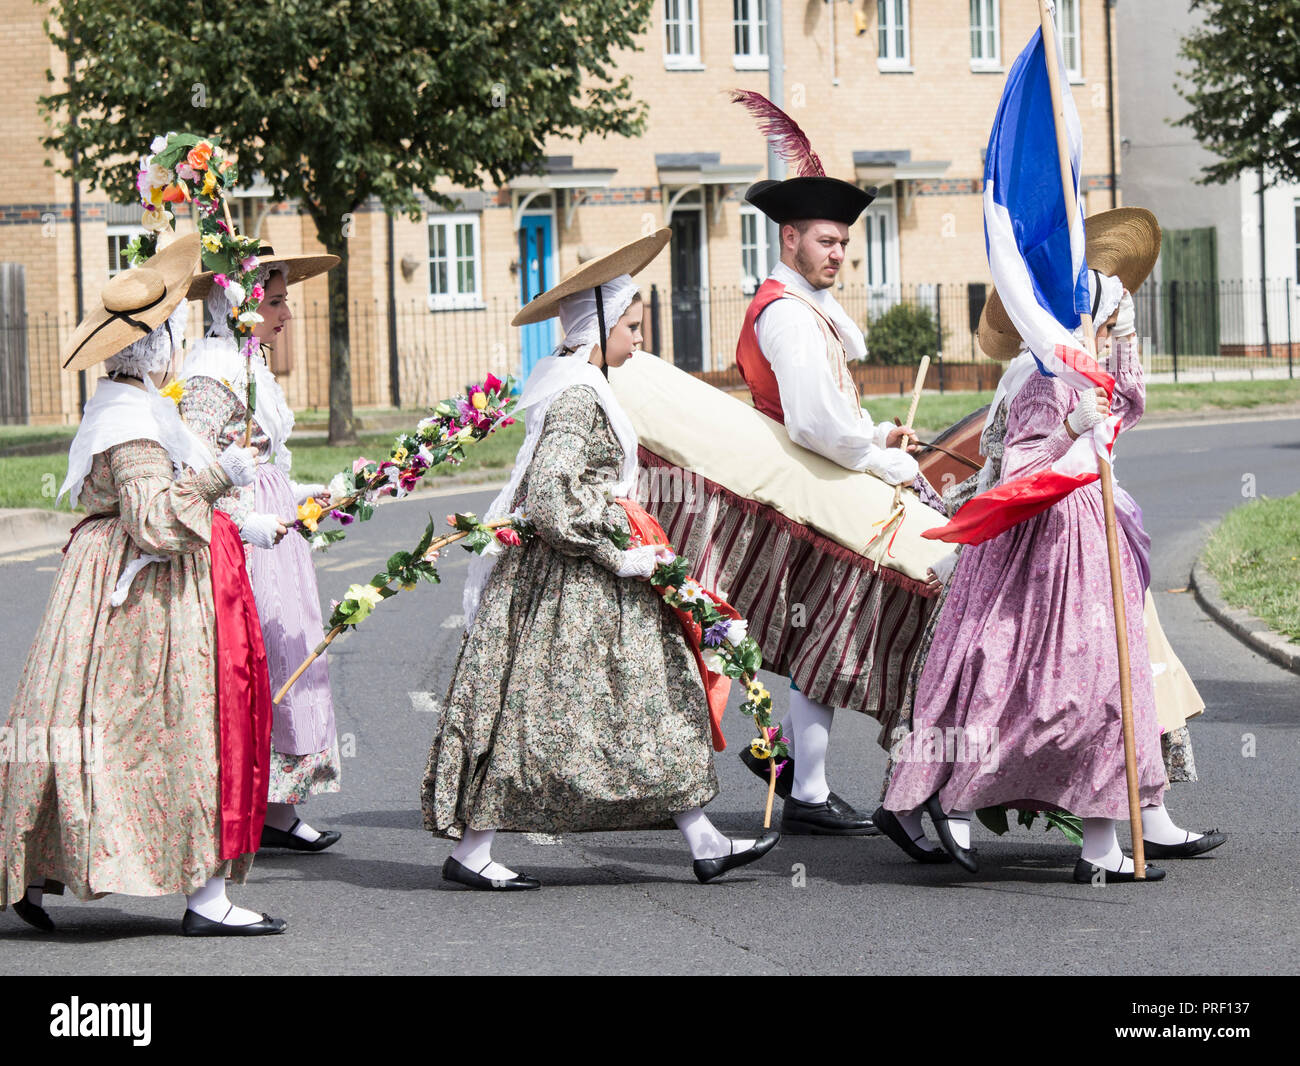 Dancers from France at the opening day of the Billingham International Folklore Festival of World Dance. UK Stock Photo